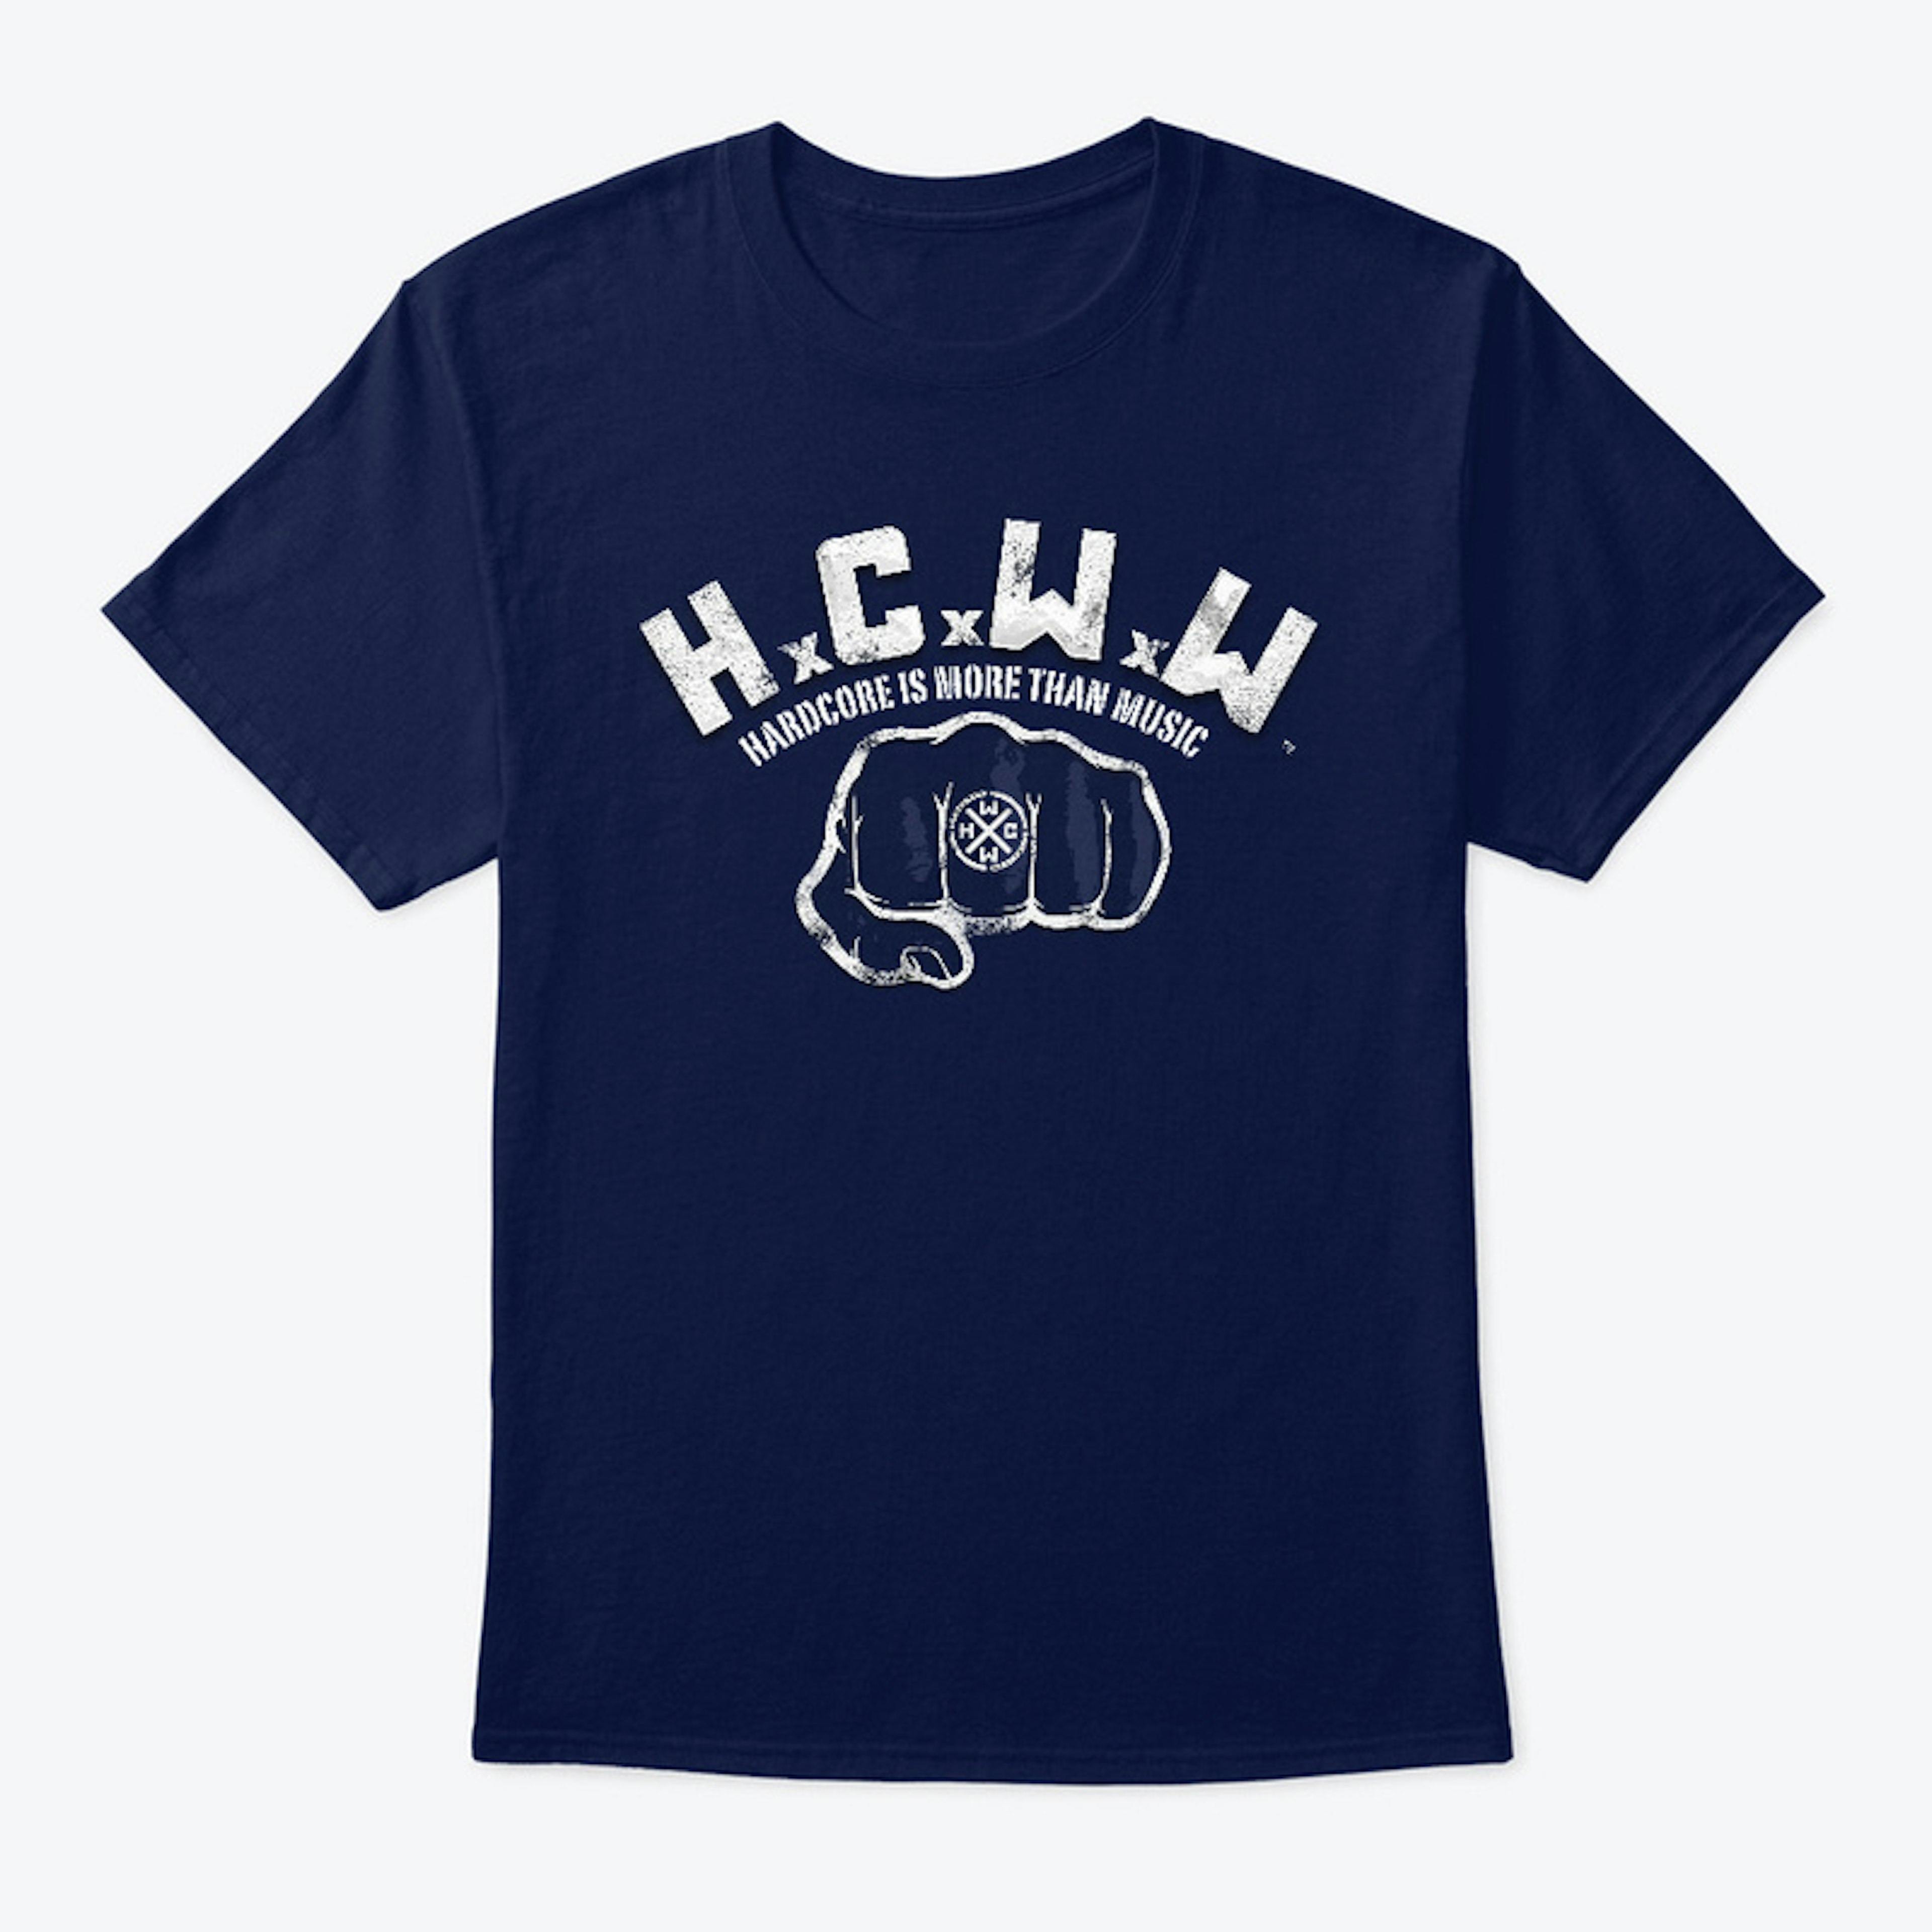 HCWW is More Than Music -T-shirt